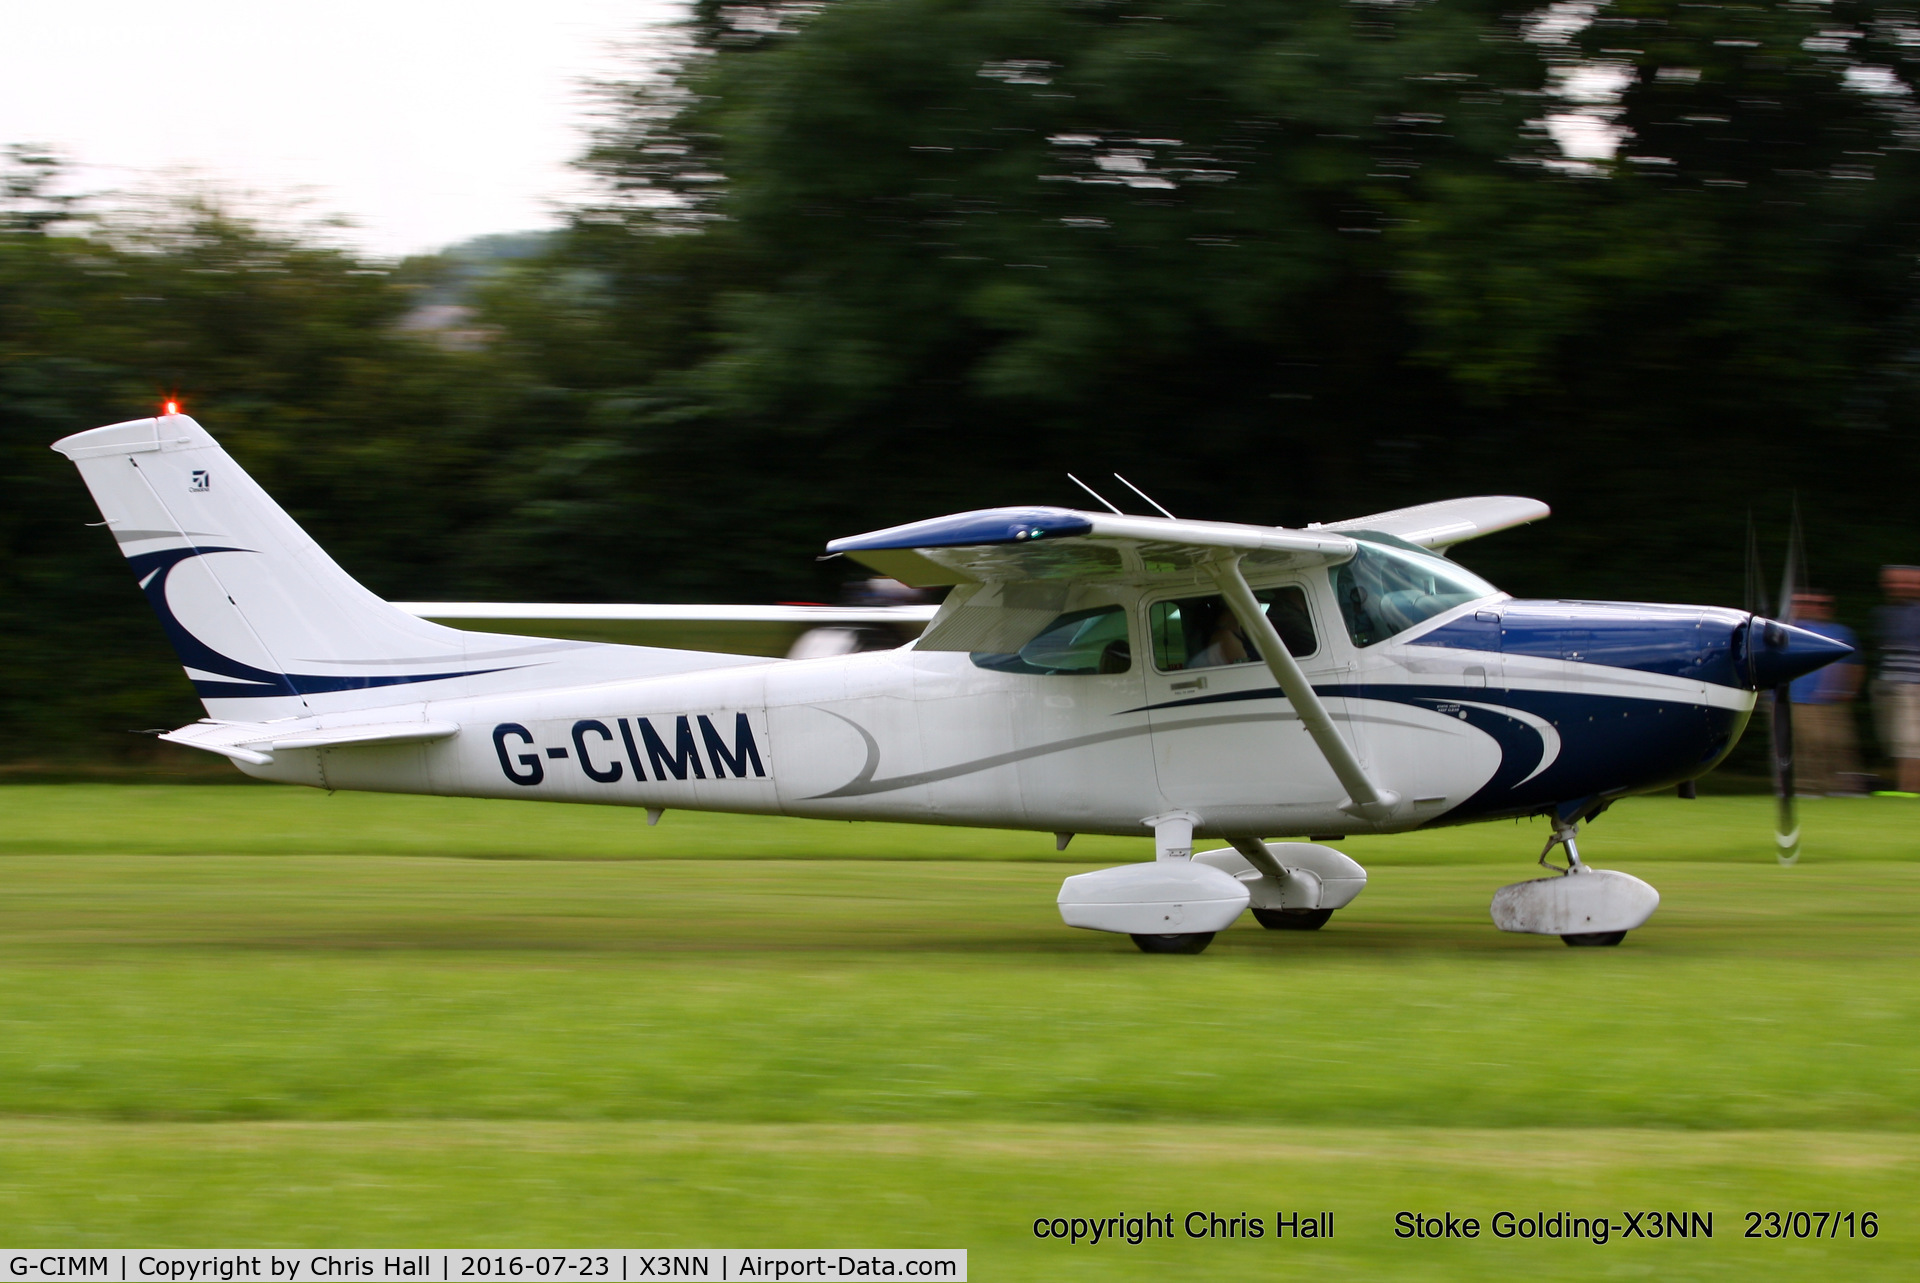 G-CIMM, 1975 Cessna 172M C/N 17265628, Stoke Golding Stakeout 2016